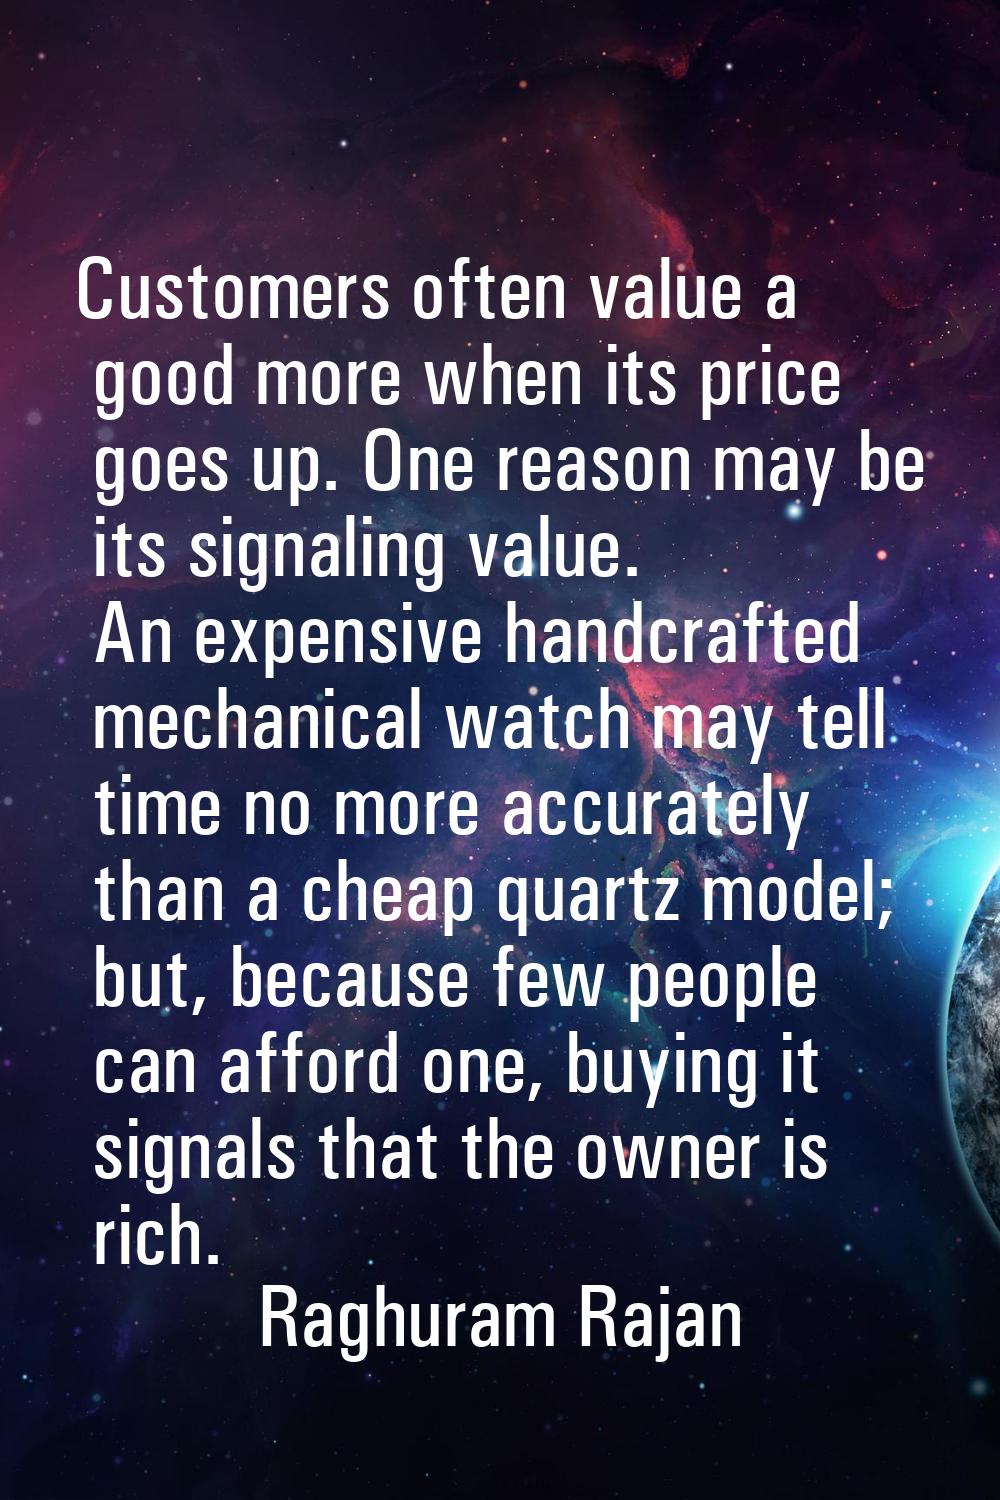 Customers often value a good more when its price goes up. One reason may be its signaling value. An